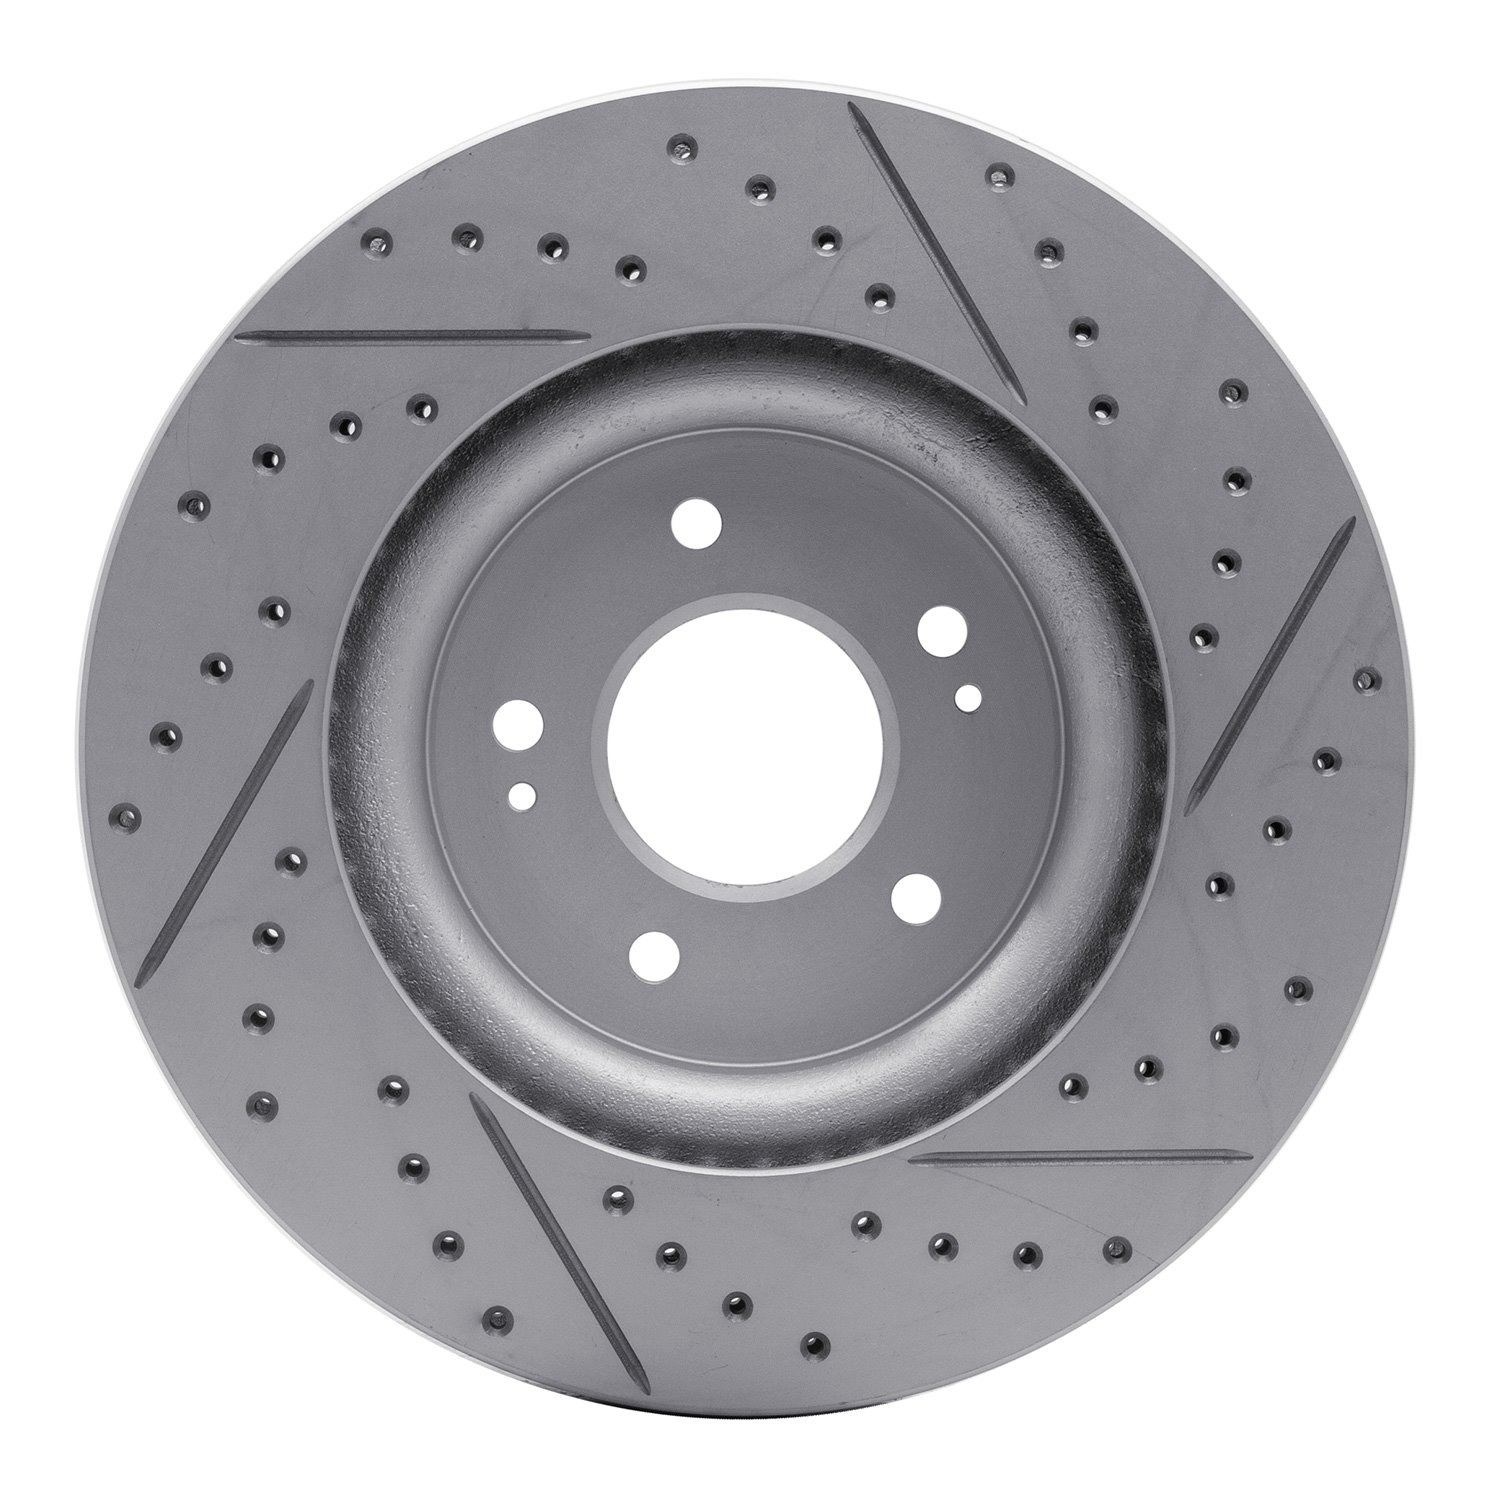 830-21040R Geoperformance Drilled/Slotted Brake Rotor, Fits Select Kia/Hyundai/Genesis, Position: Front Right